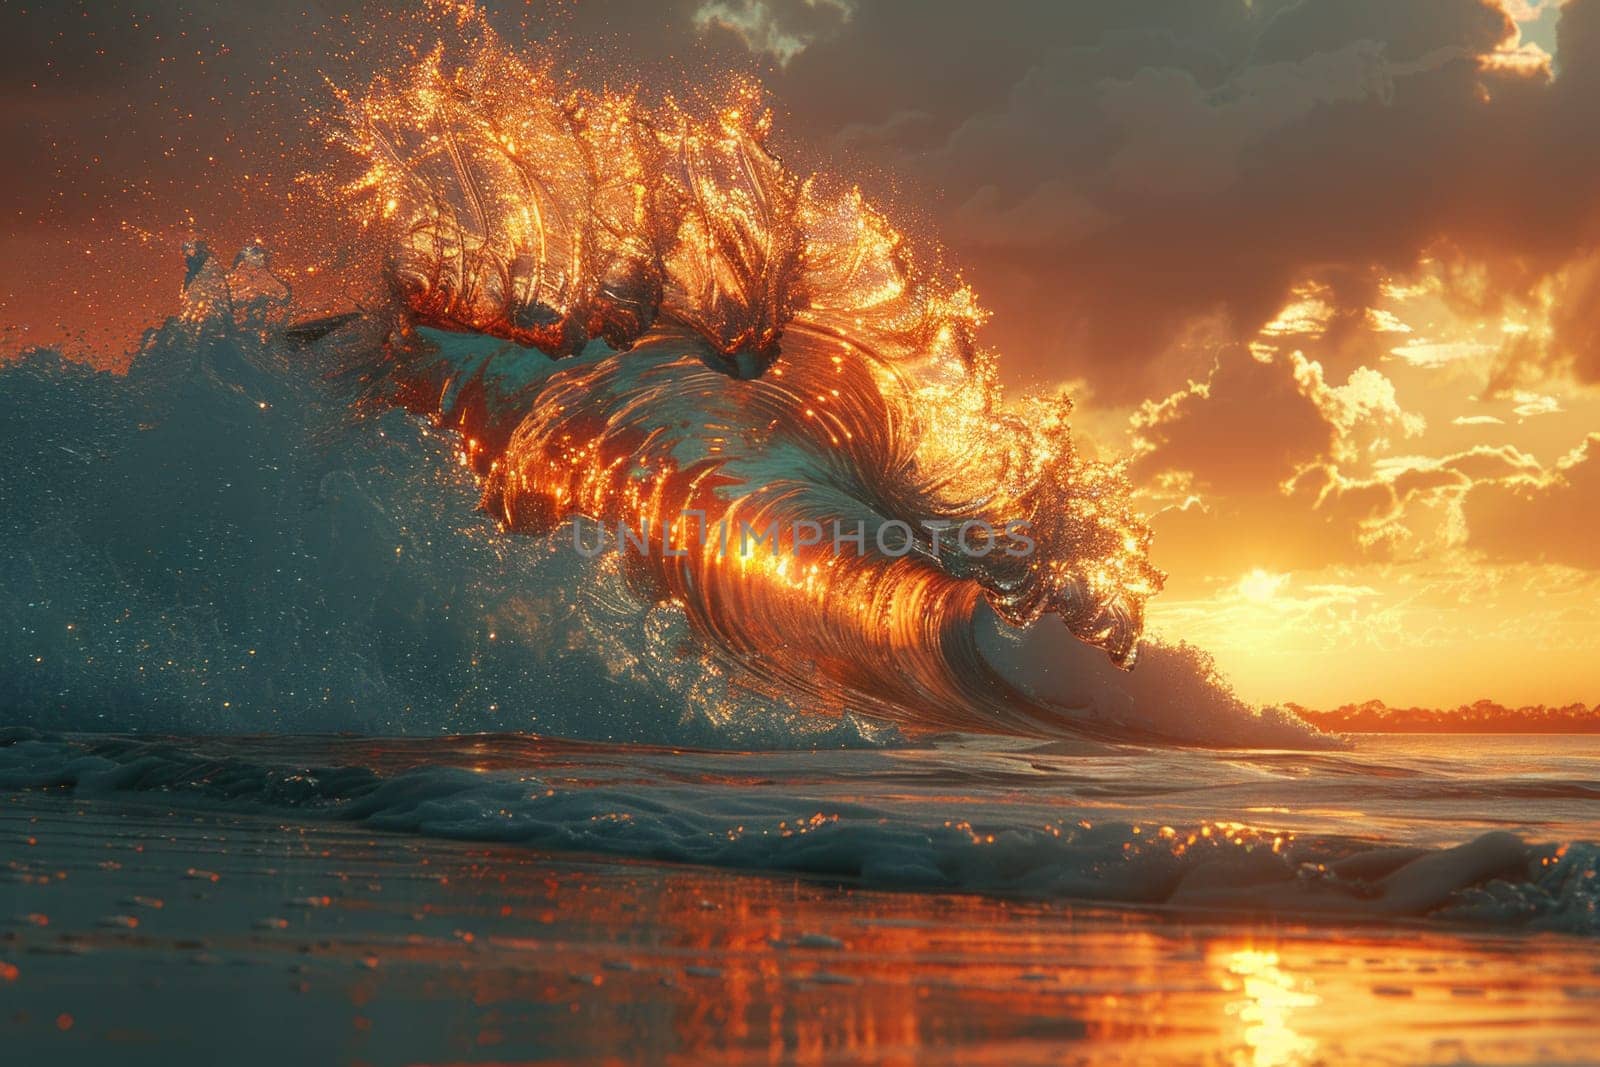 A breathtaking scene unfolds as a colossal wave crashes into the sandy shore under the warm hues of a setting sun, creating a mesmerizing display of power and beauty.